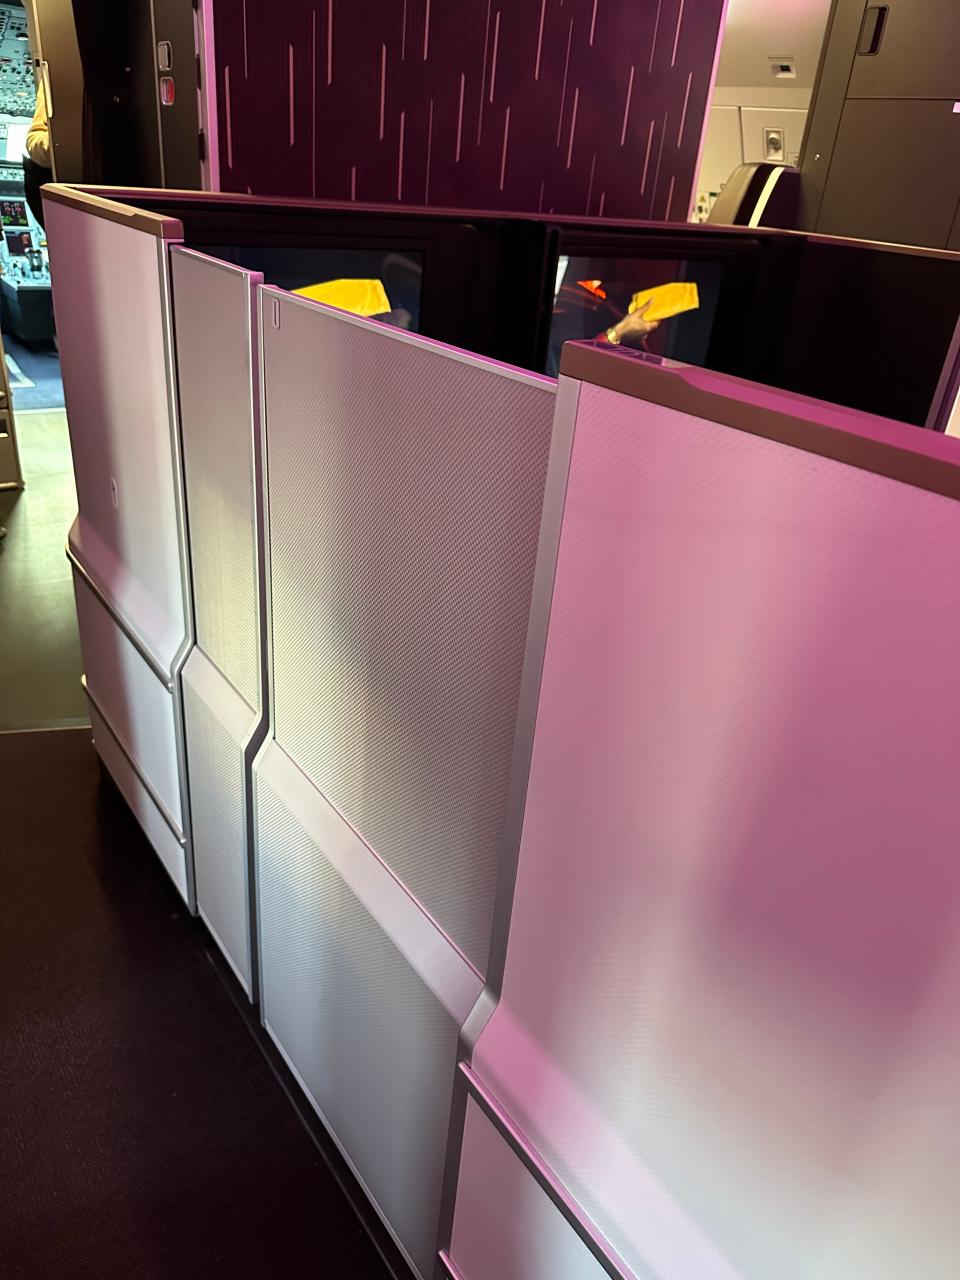 Retreat suite on Virgin Atlantic airplane, Dan Koday, " I was one of the first people to see Virgin Atlantic's newest aircraft that will fly between NYC and London."